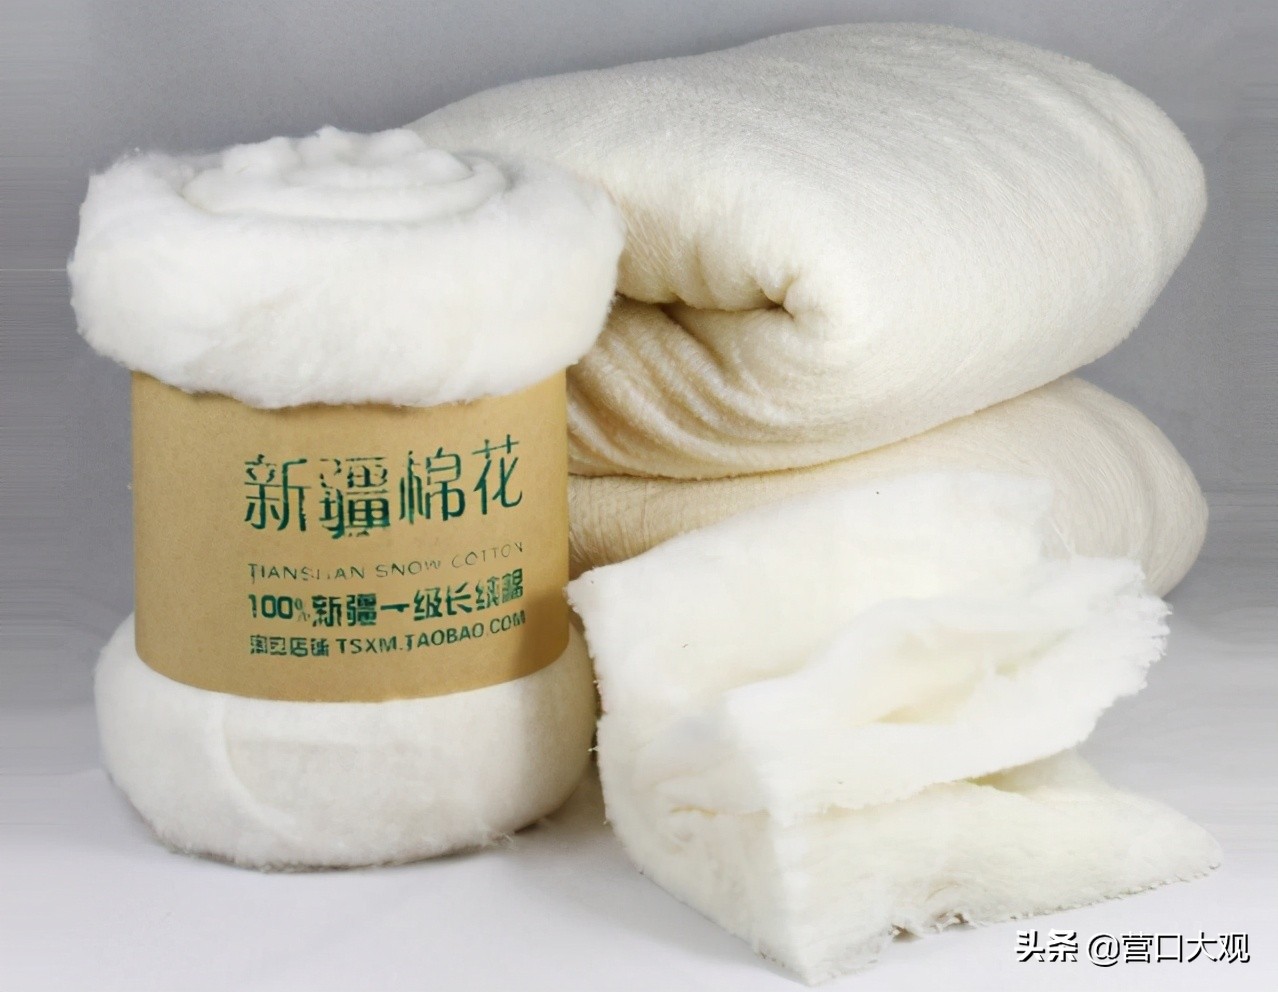 Take you to understand relevant knowledge of cotton, nod assist for top class Xinjiang cotton together